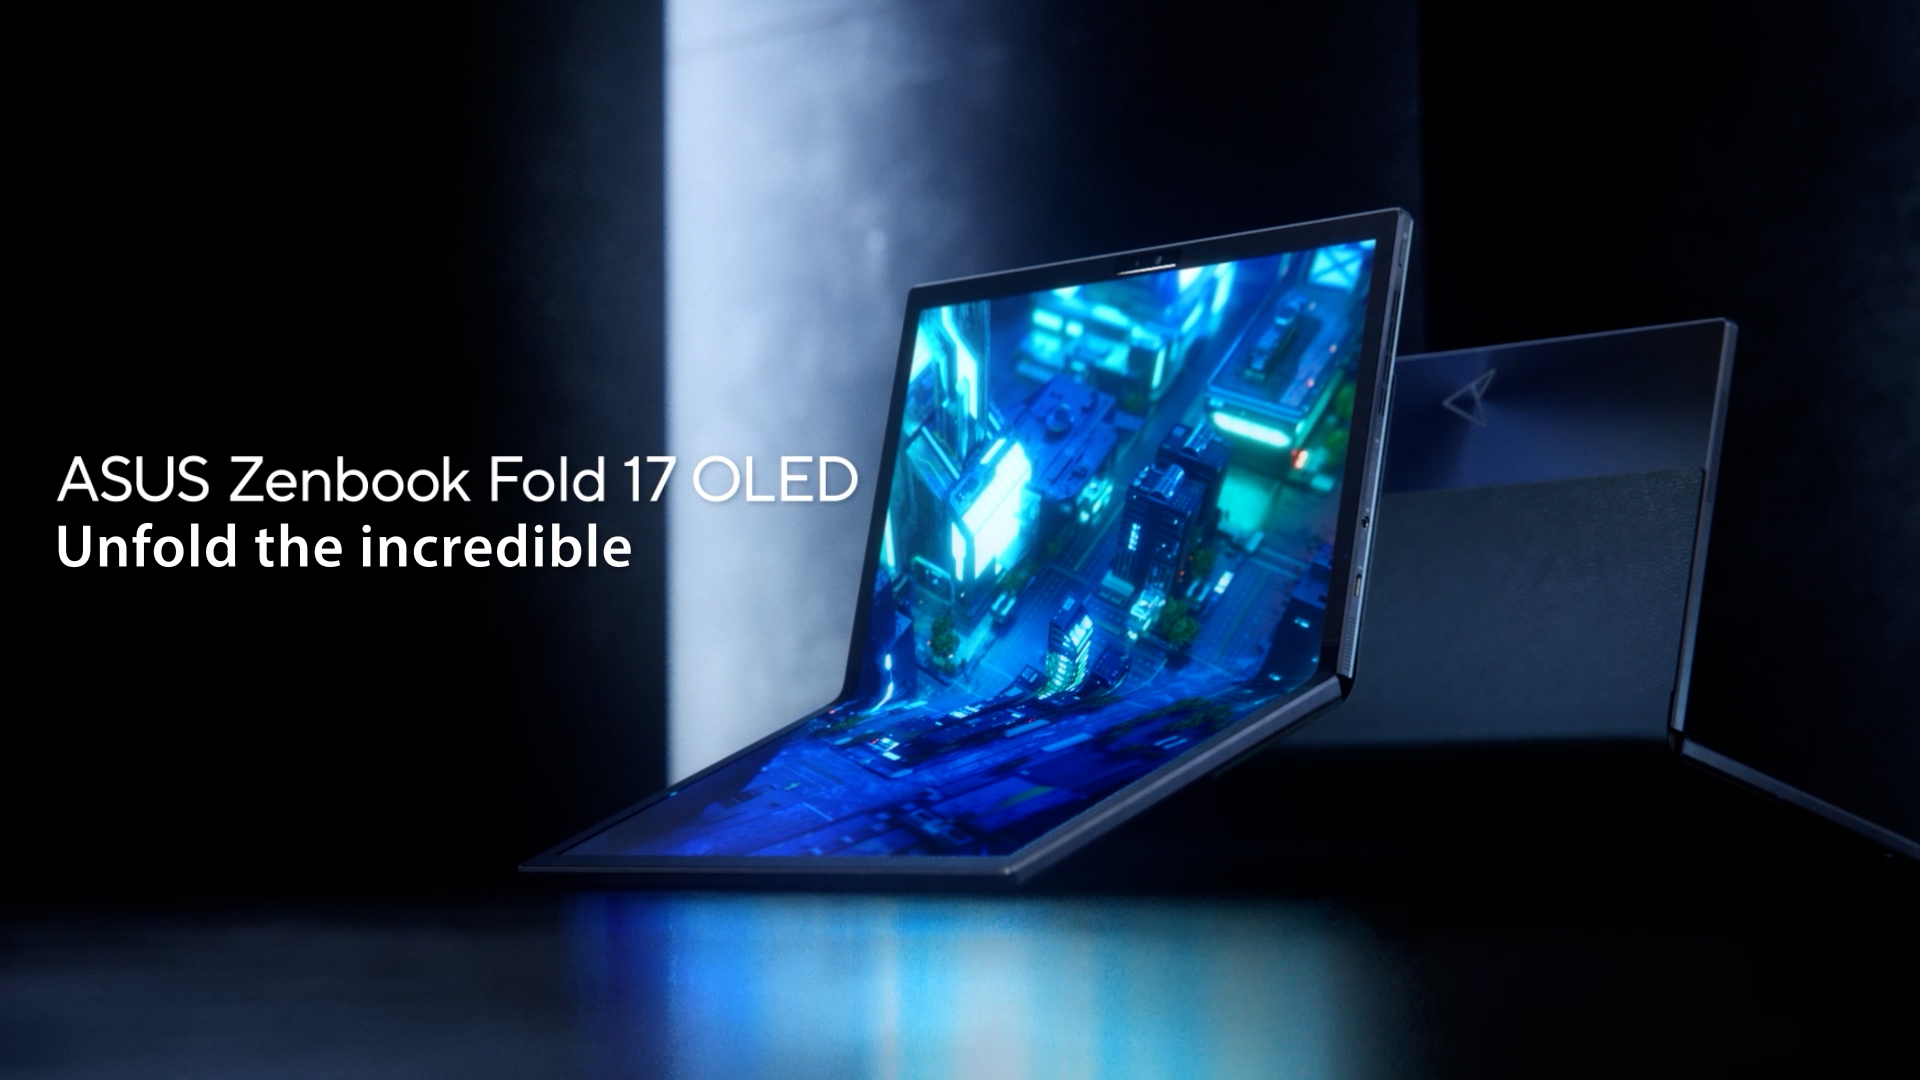 [CES 2022]Asus Zenbook 17 Fold OLED announced with 12th Gen Intel processors and up to 16GB RAM